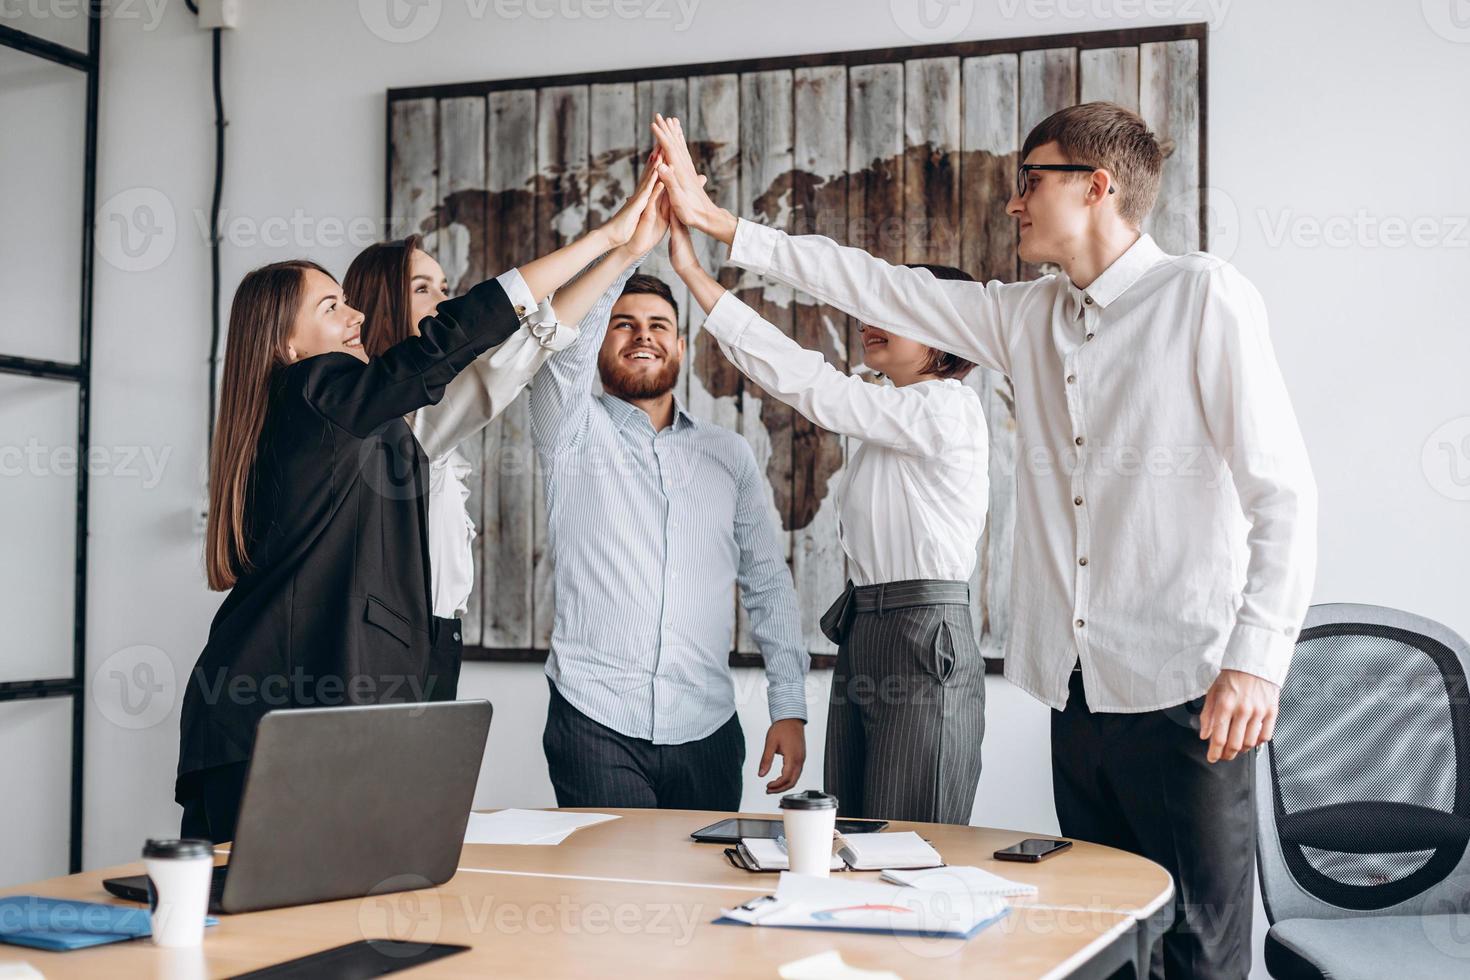 Business people happy showing team work and giving five after signing an agreement or contract with partners in office interior. Happy people smiling. Agreement or contract concept. - Image photo